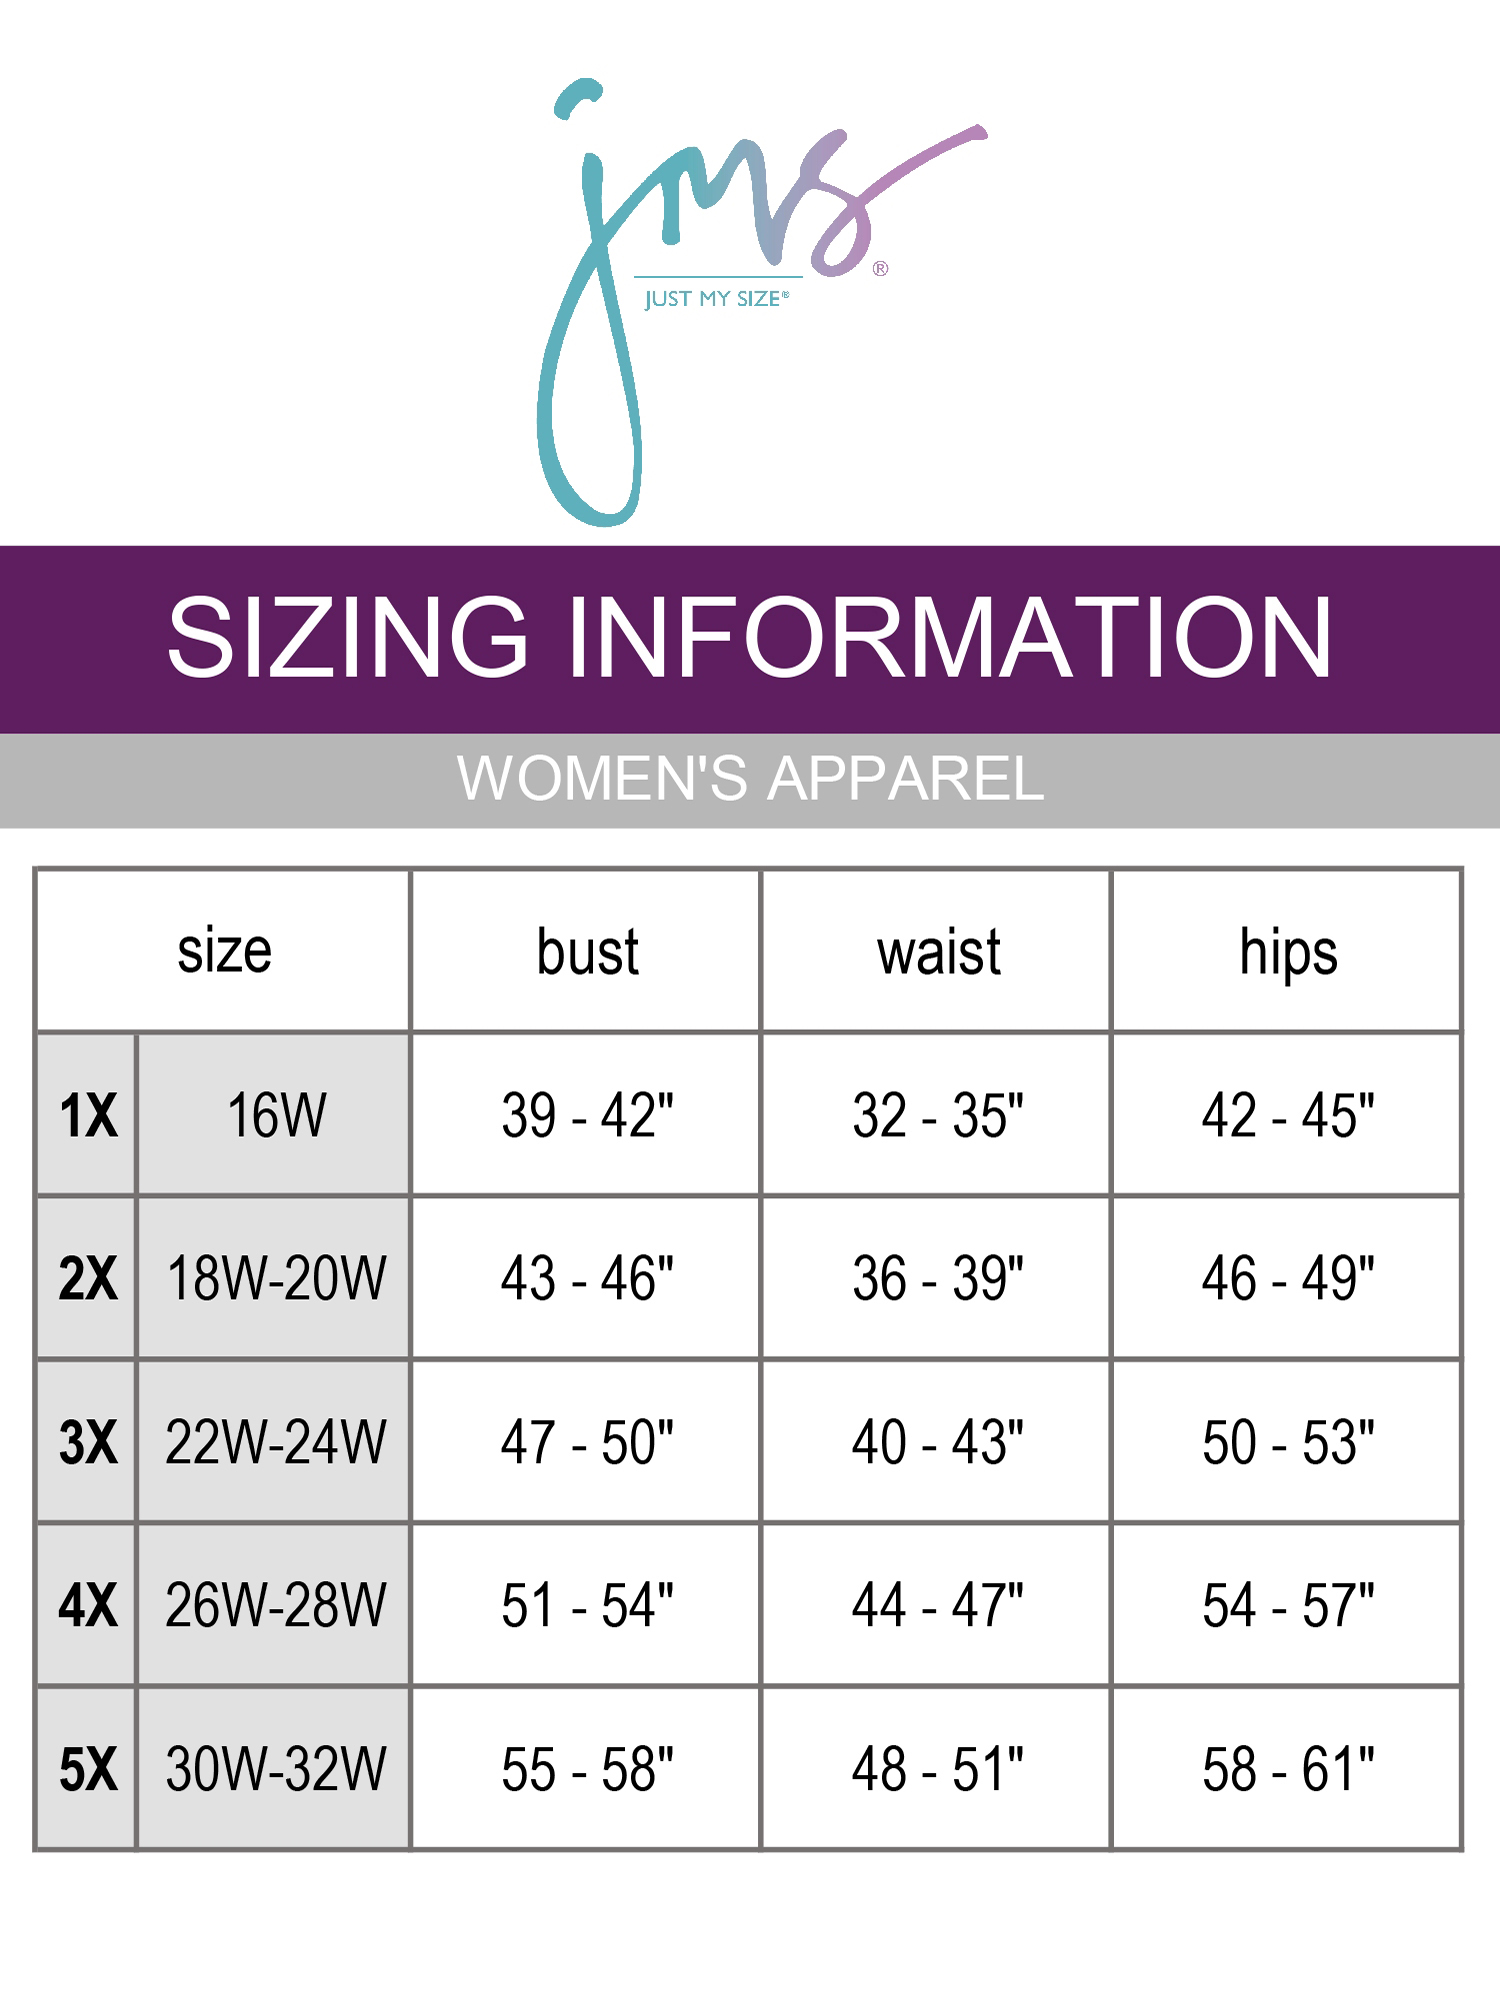 Just My Size Women's Plus Size Graphic Short Sleeve V-neck Tee - image 2 of 5